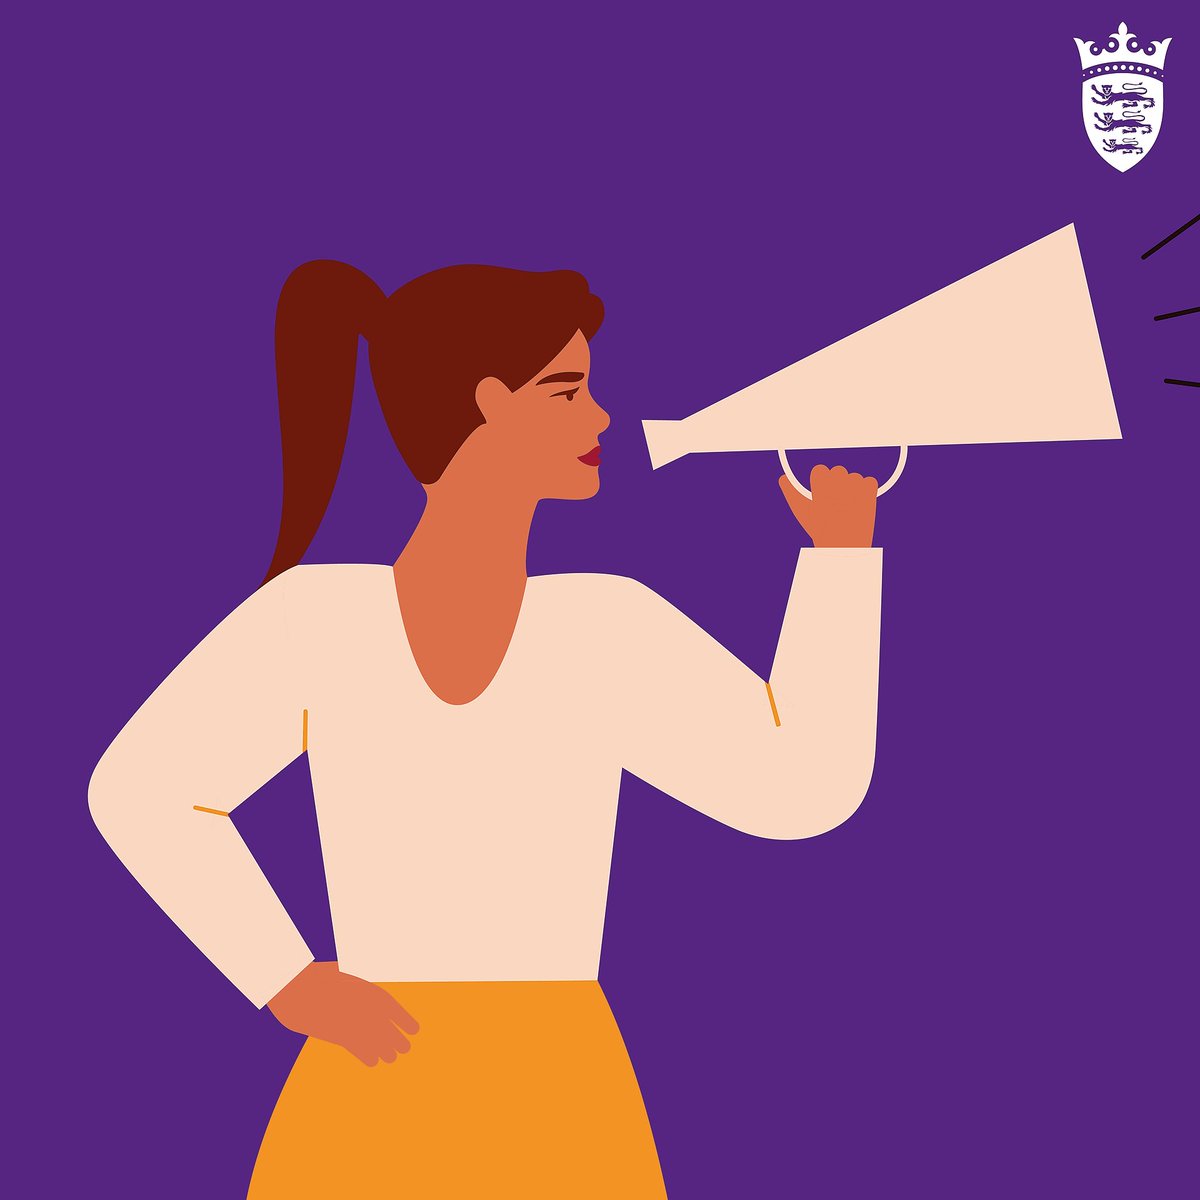 We want to hear from you about violence against women and girls, whether you have direct experience or not – share your thoughts with the independent task force researching the issue here in Jersey: bit.ly/3Mi6ZRE